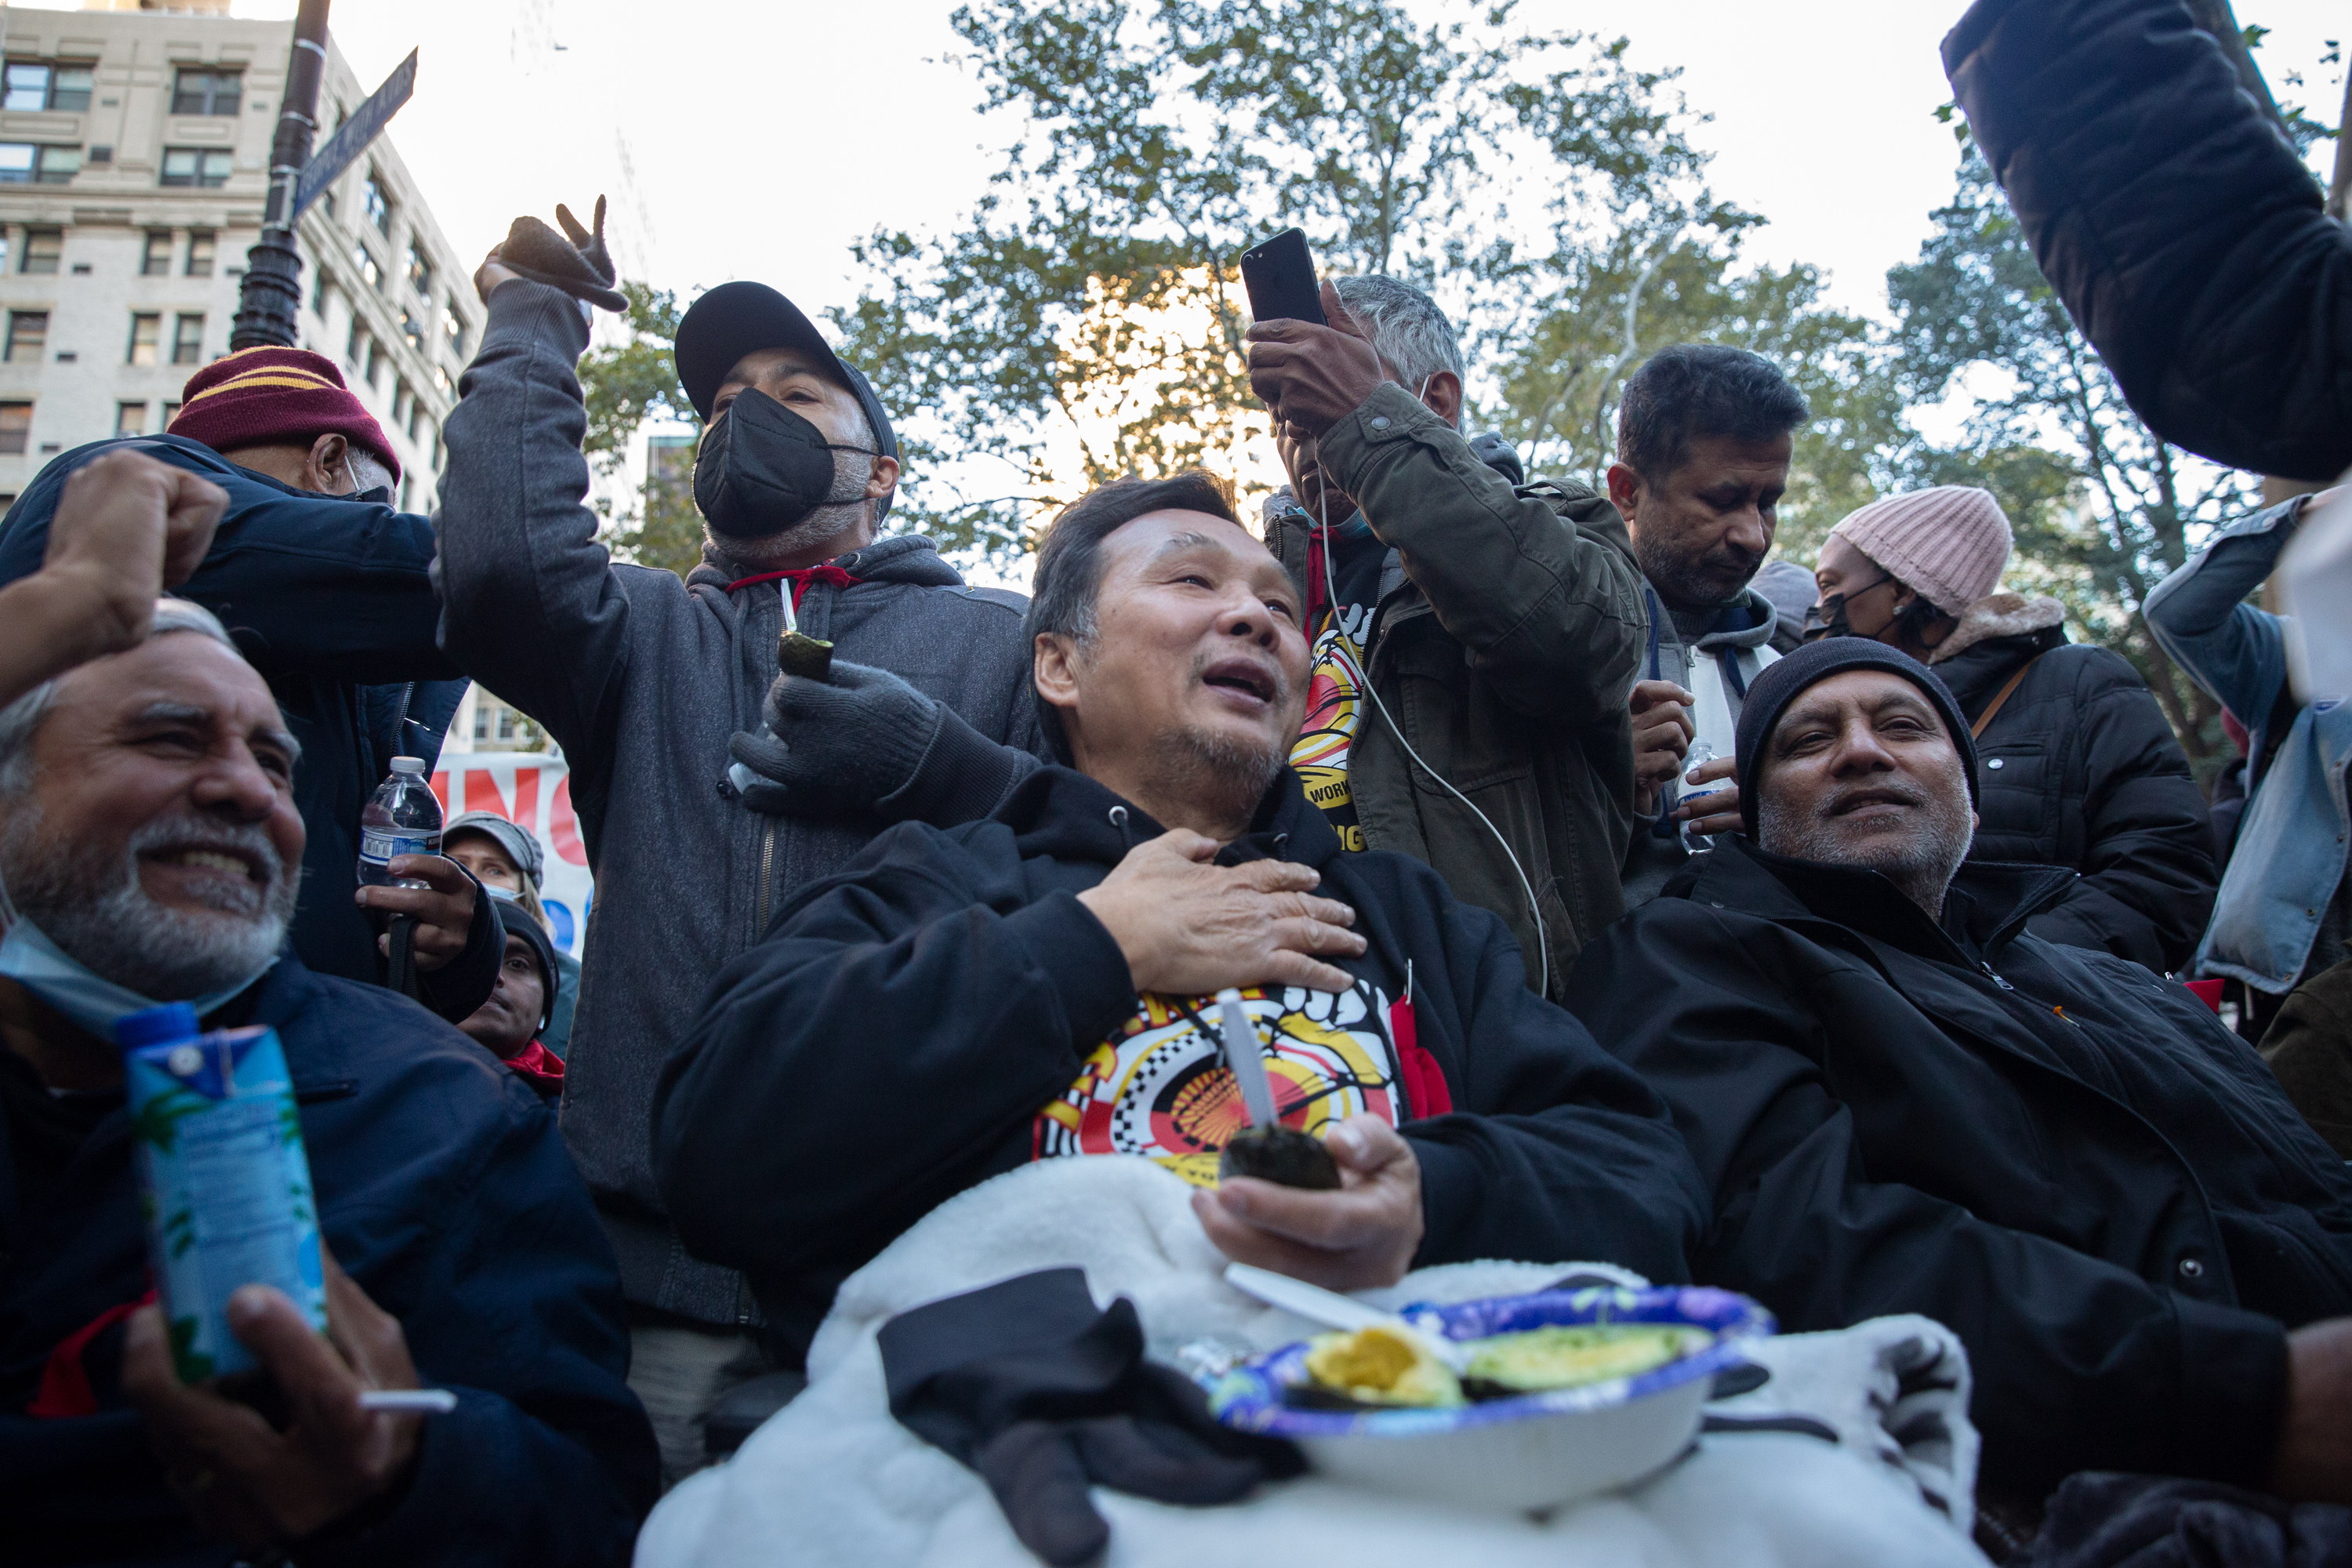 Taxi workers celebrate ending their hunger strike outside City Hall after gaining concessions on their medallion debt, Nov. 3, 2021.